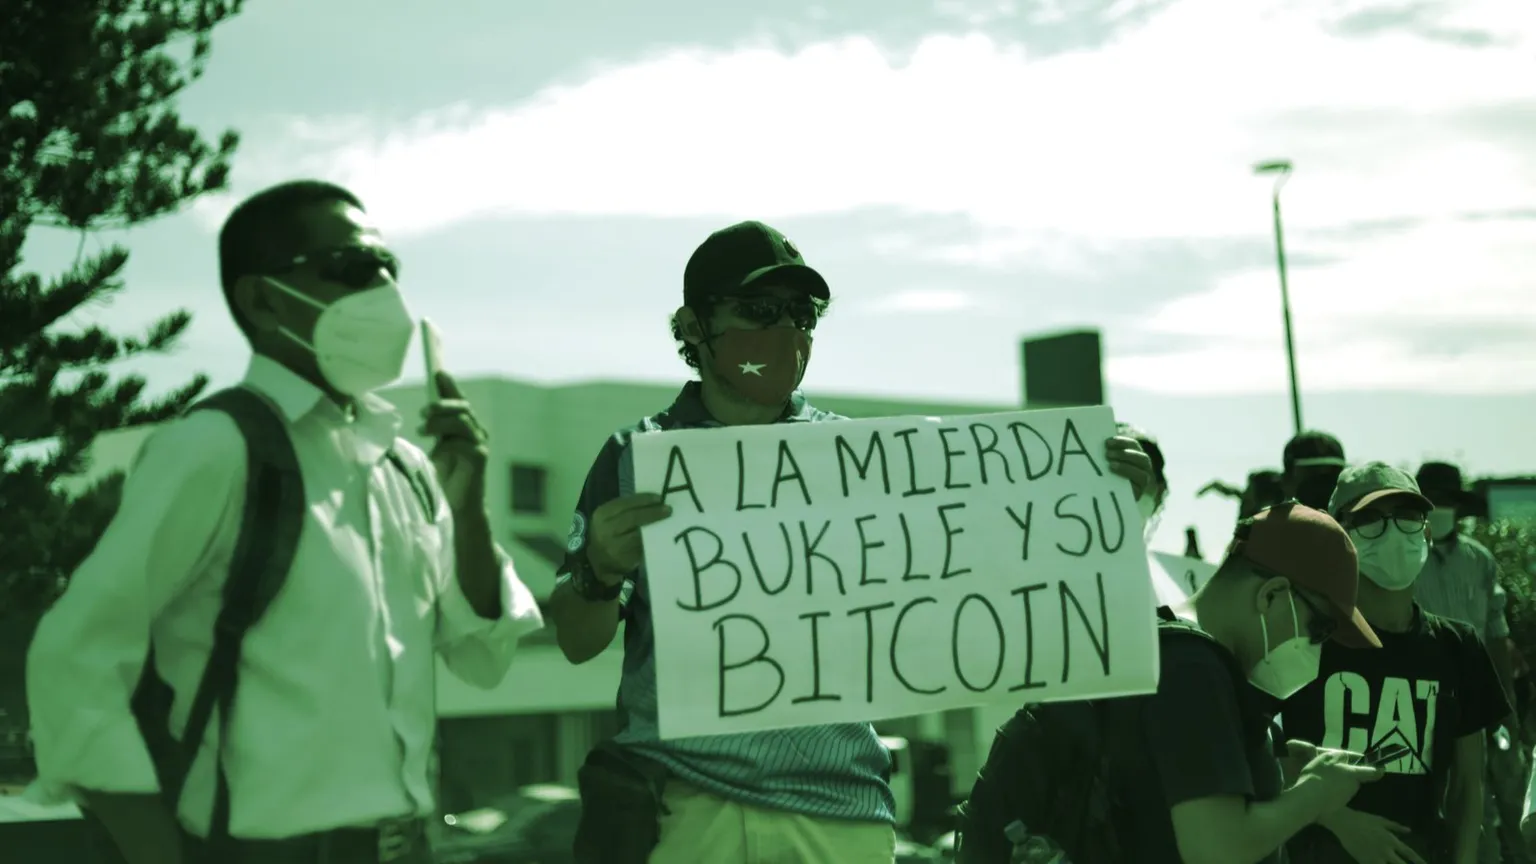 A man holding a sign roughly translated as "to hell with Bukele and his Bitcoin." Image: Shutterstock